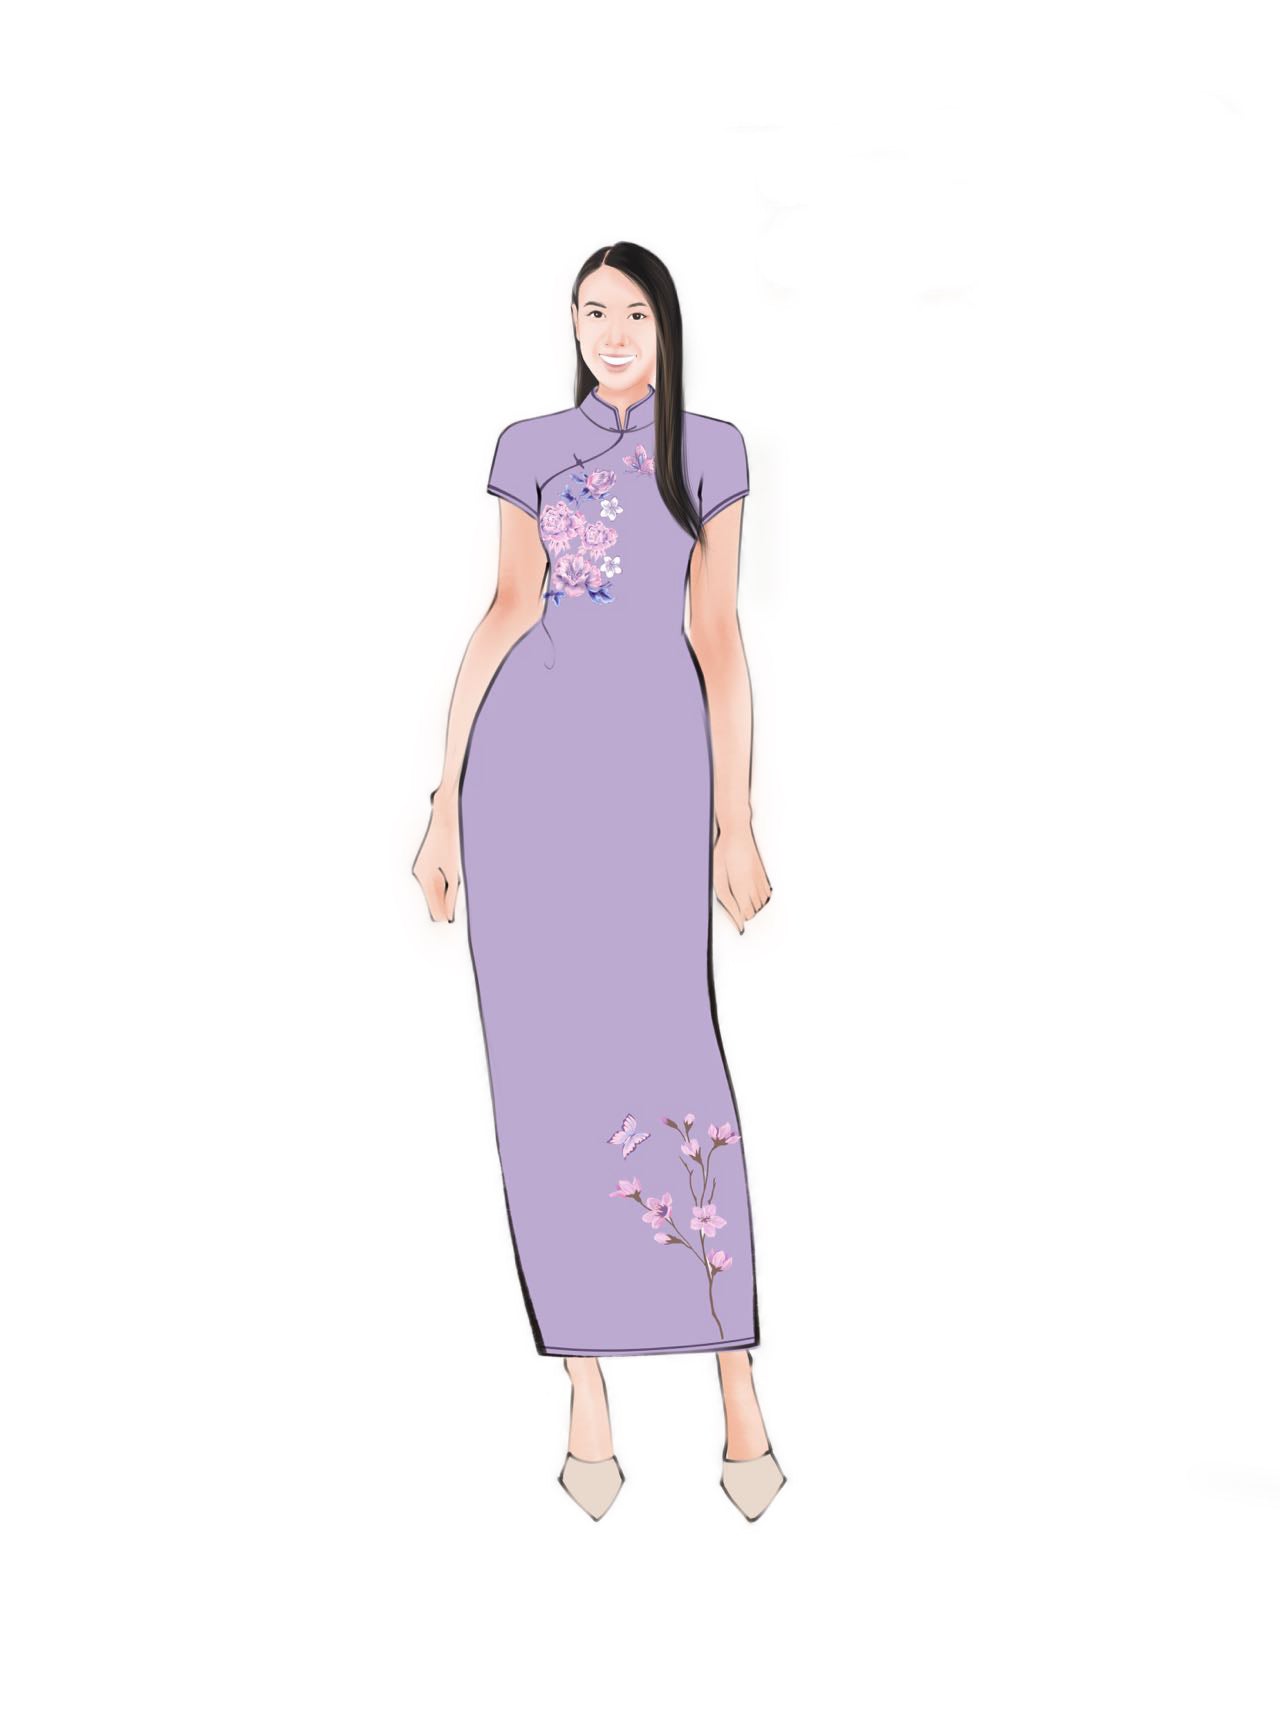 Bespoke Cheongsam | Lavender Purple Silk with Floral Embroideries